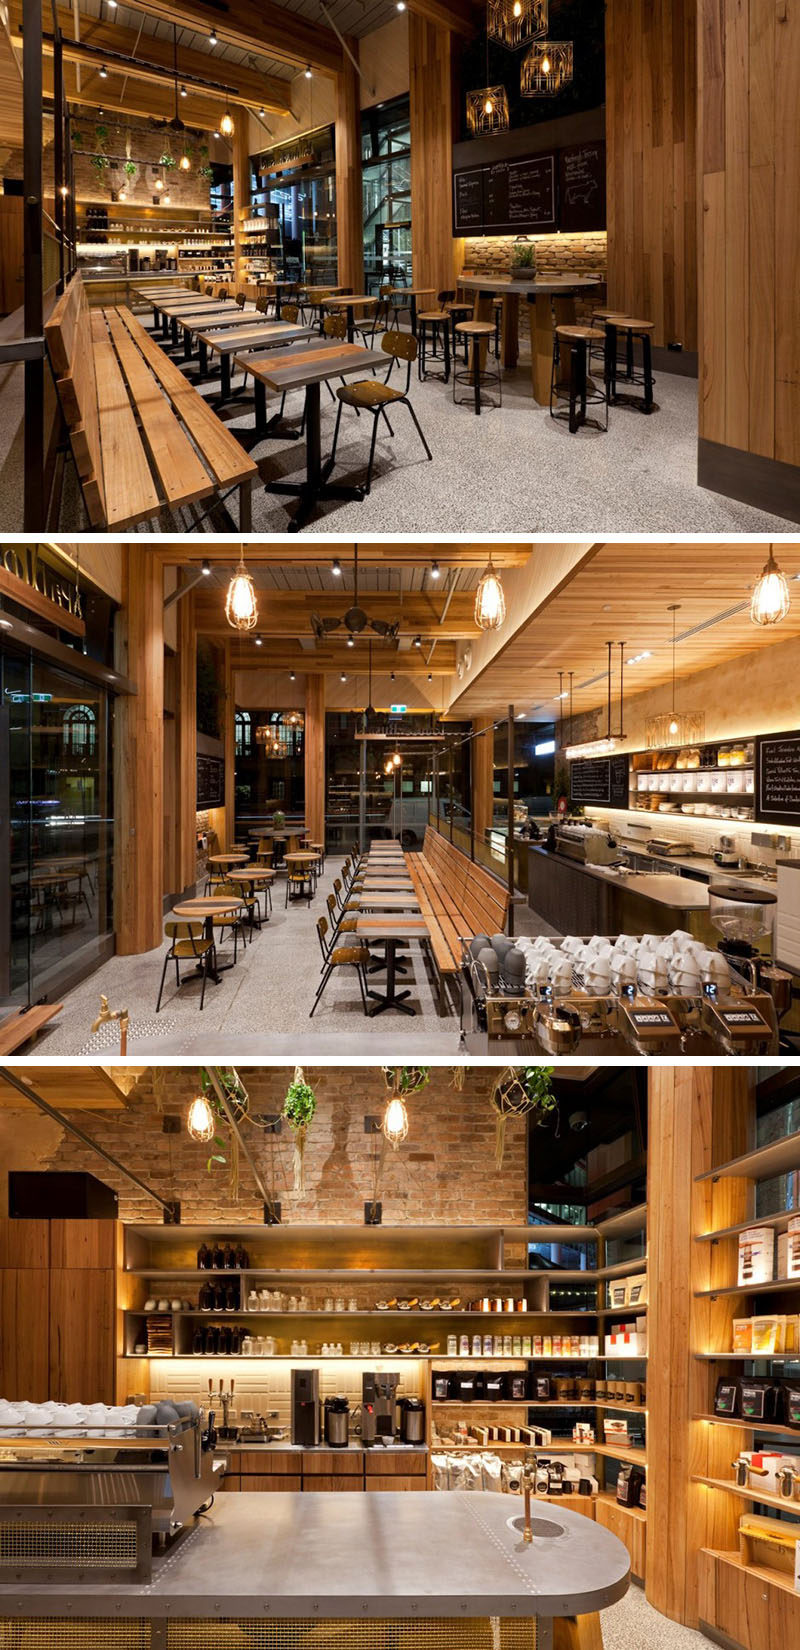 This modern coffee shop features polished concrete, aged brass, reclaimed brick, and wood elements throughout the design.